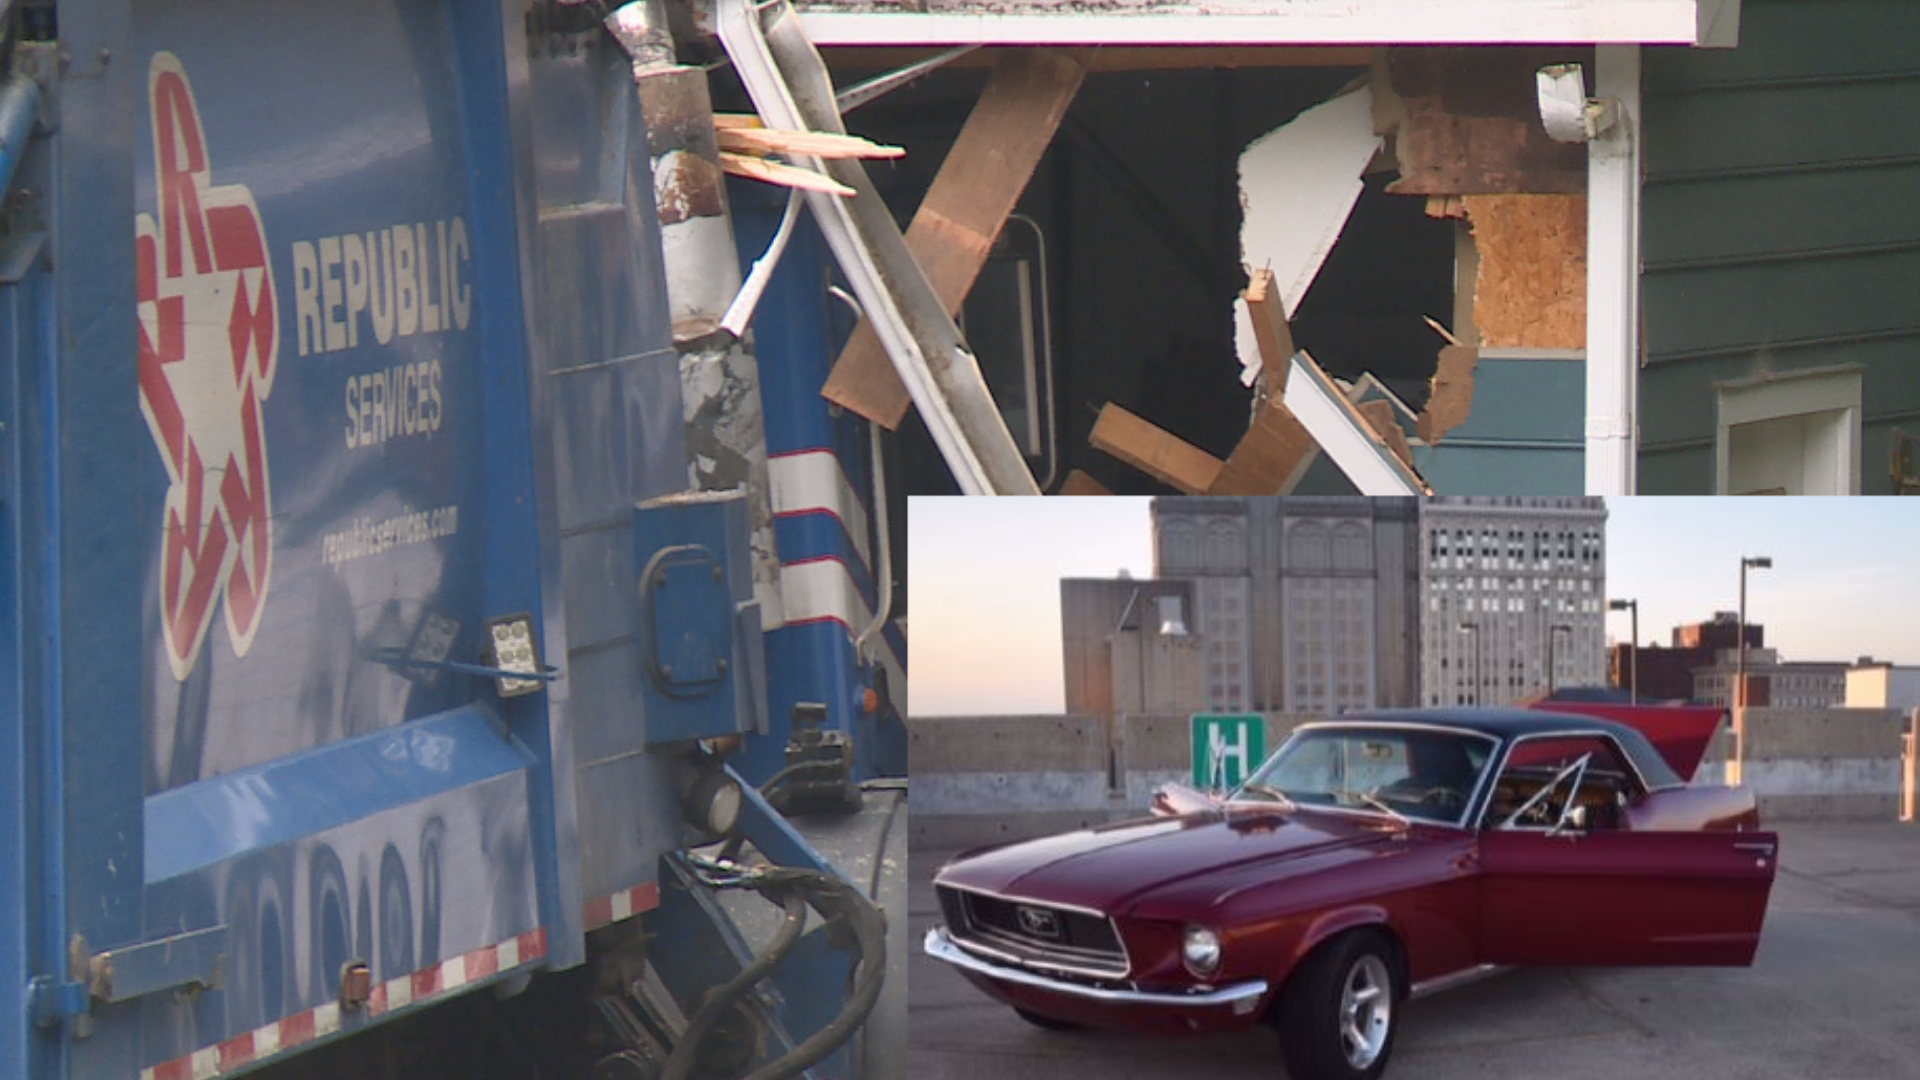 A Republic Waste Service trash truck hit a newly renovated Greensboro house and destroyed the family's restored 1968 Mustang that was in the garage. Investigators say the truck's parking brake failed and the truck rolled away, after the driver got out to move trash cans.